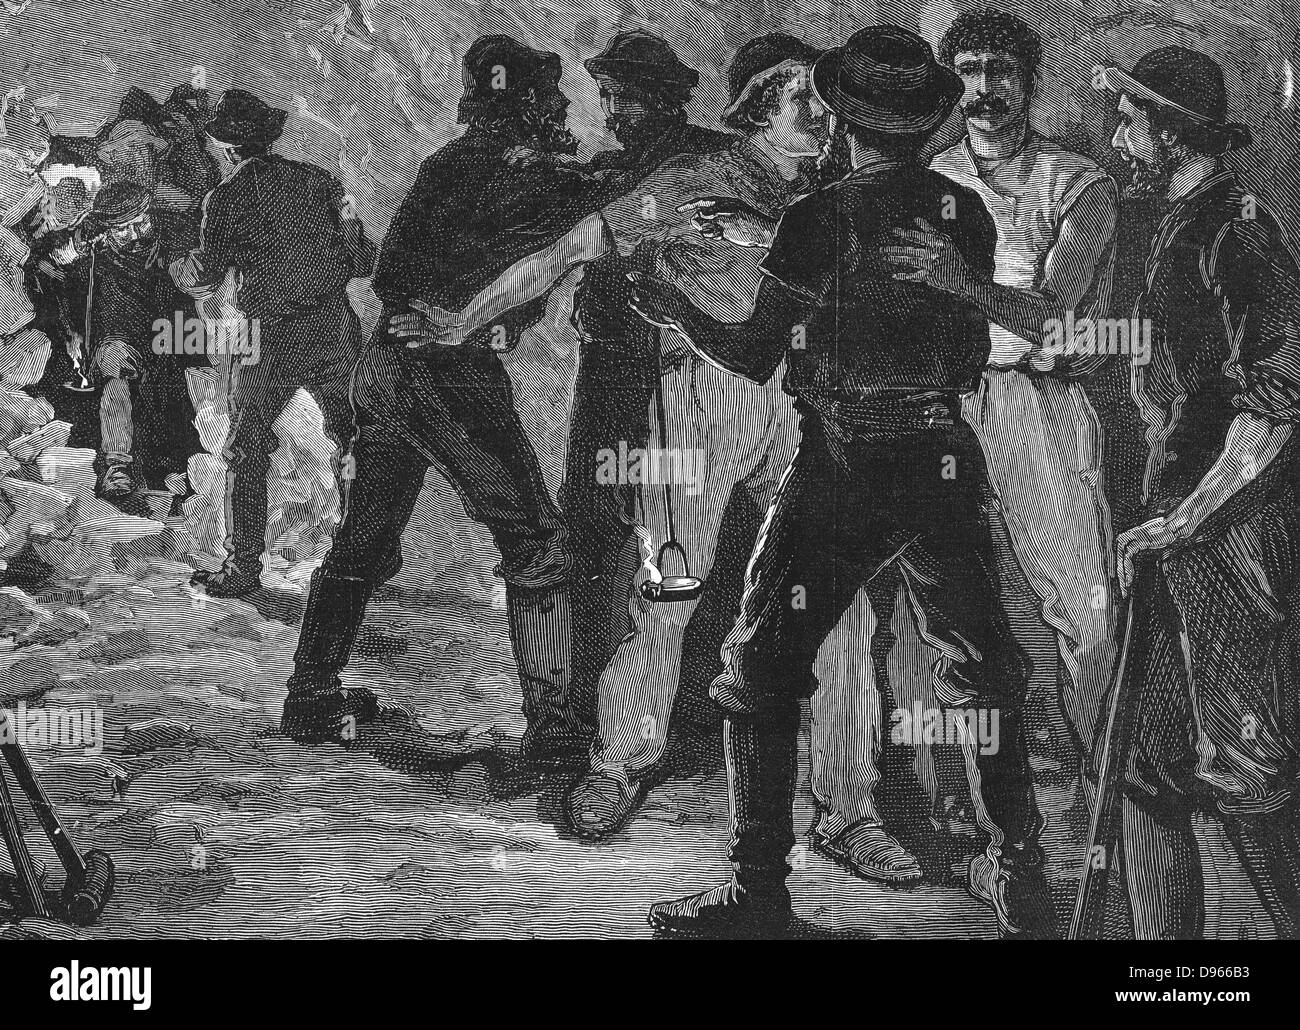 St Gothard Tunnel linking Italy and Switzerland by rail. Workmen from the two ends of the tunnel breaking through last piece of rock and meeting, 29 February 1880. Wood engraving March 1880. Stock Photo